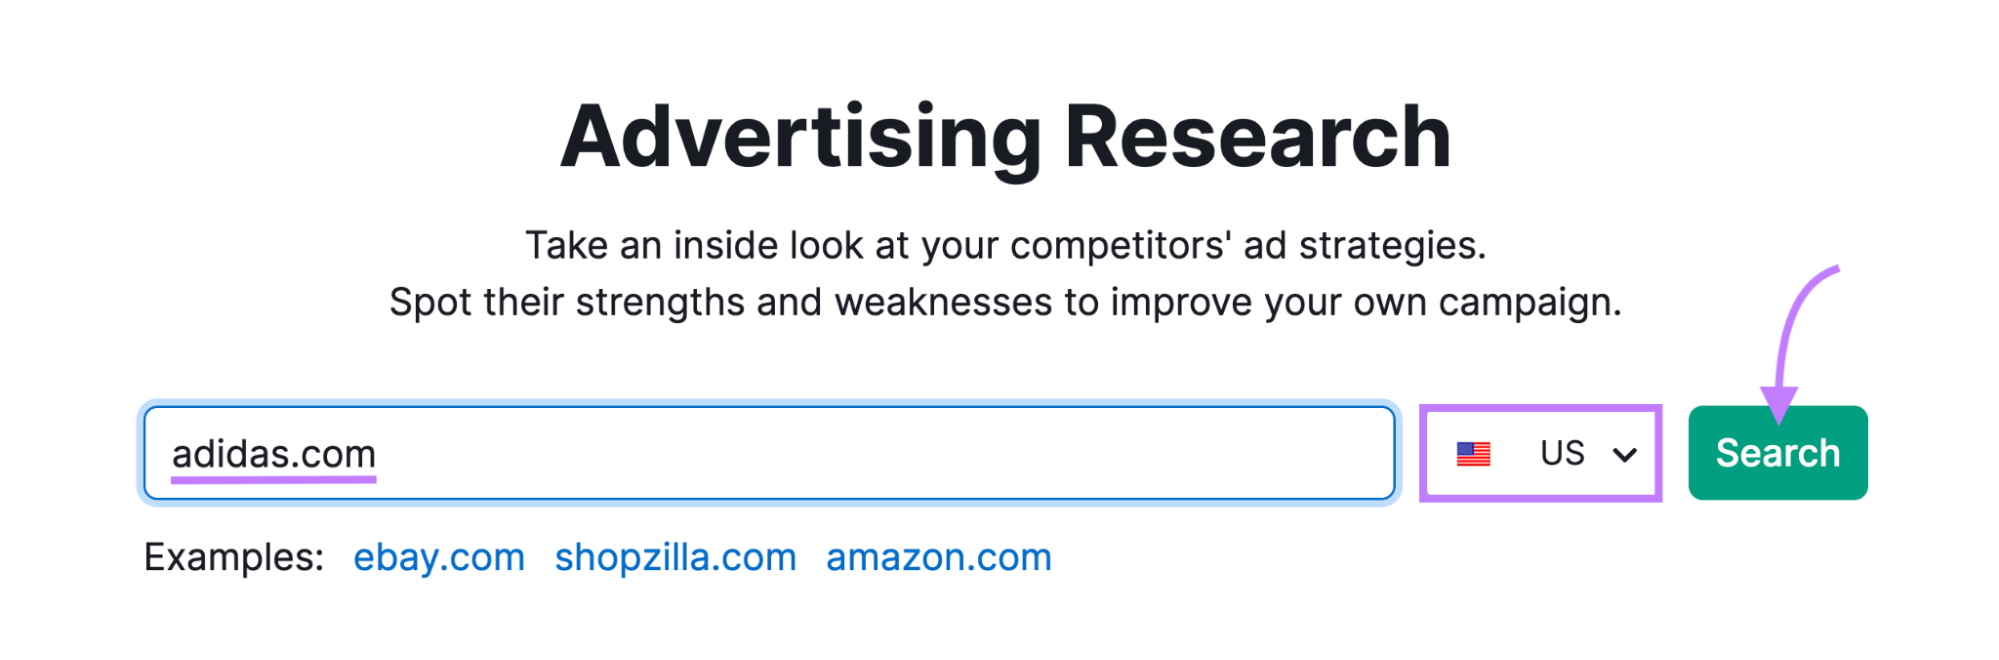 "adidas.com" entered into the Advertising Research search bar